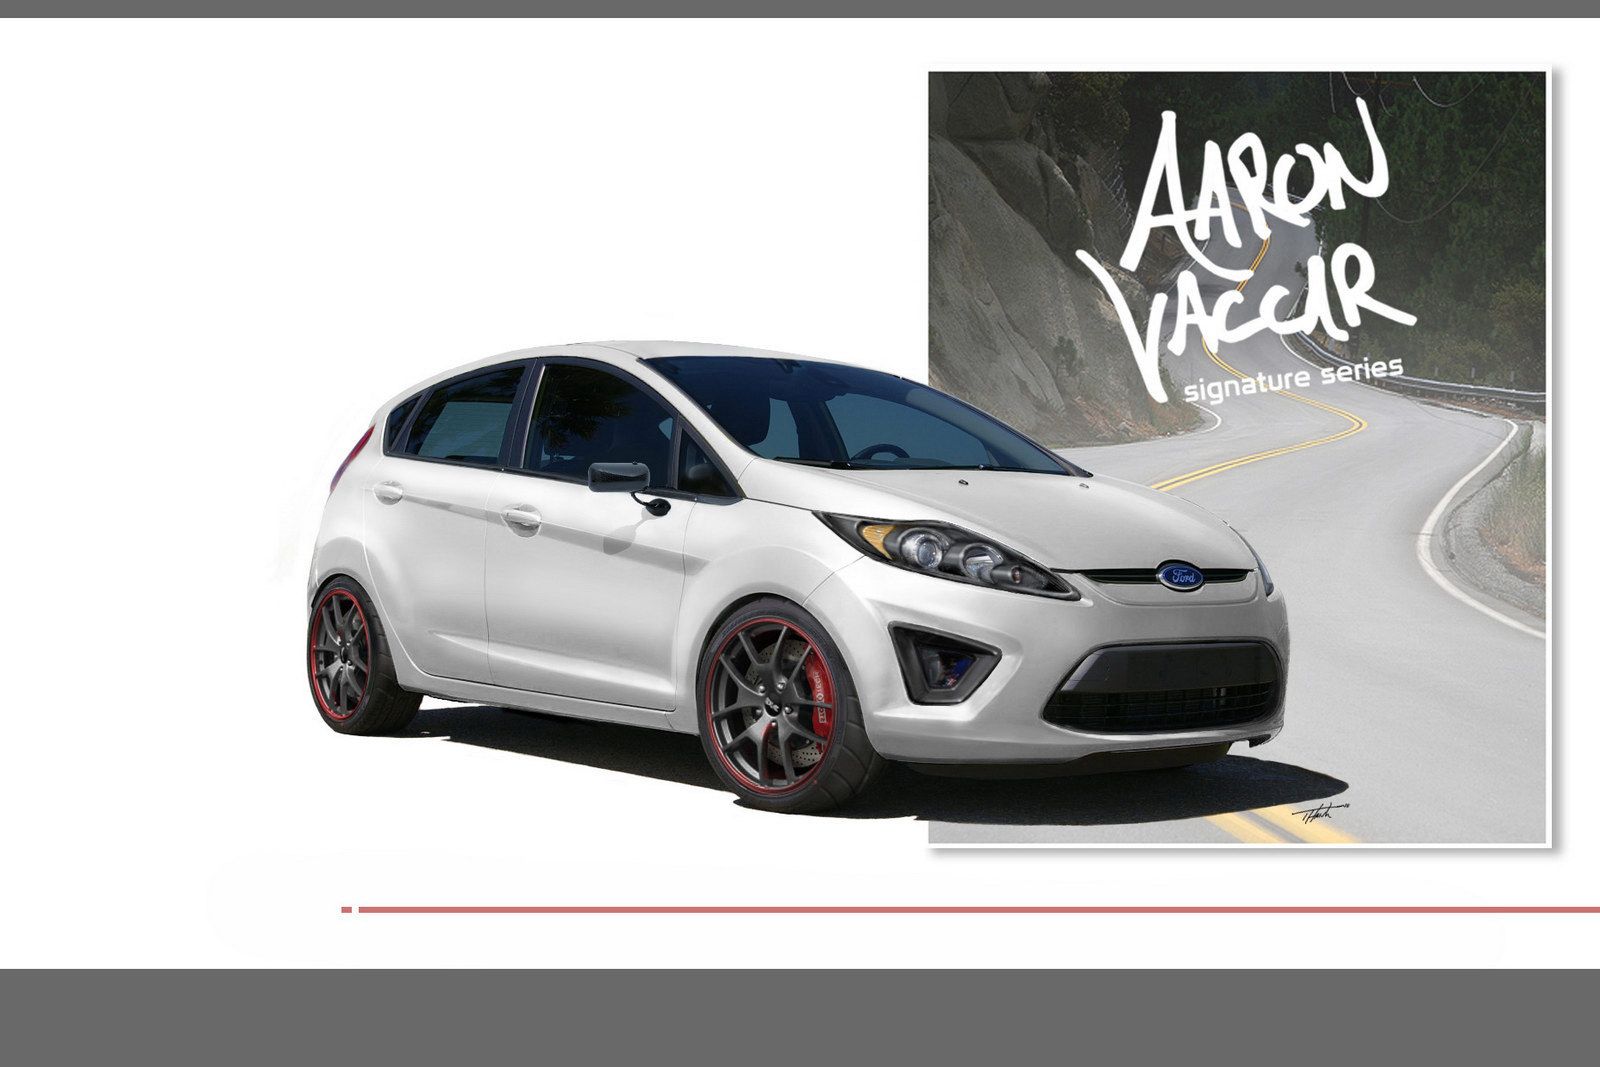 2012 Ford Fiesta by Aaron Vaccar Signature Series